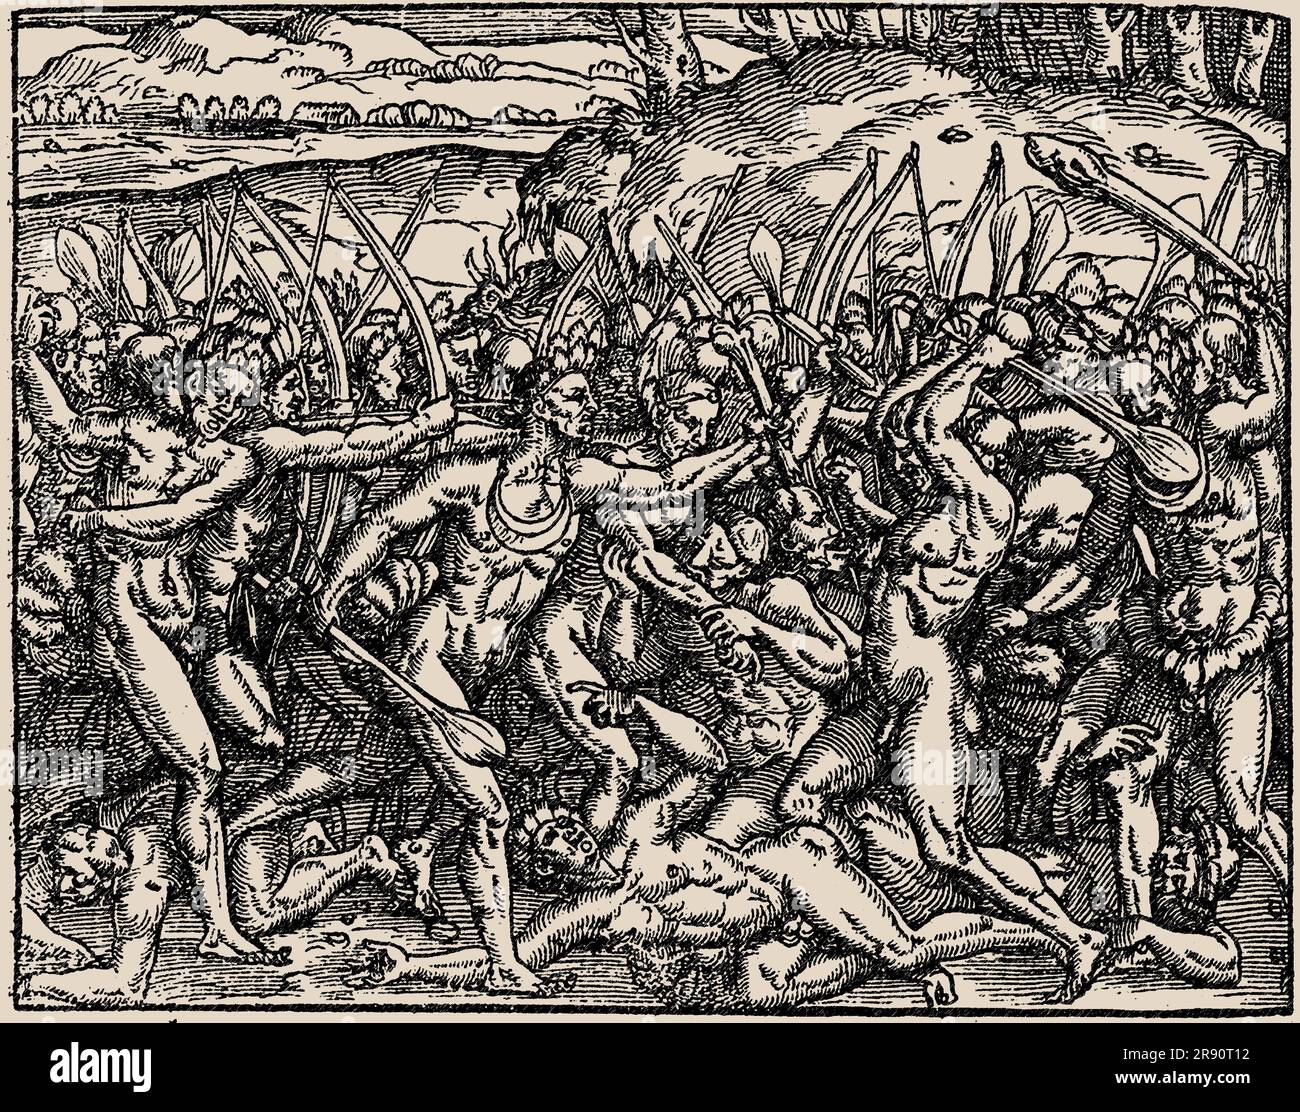 Brazil. As savages make war against each other... From Cosmografia universal by Andr&#xe9; Thevet, 1558. Private Collection. Stock Photo